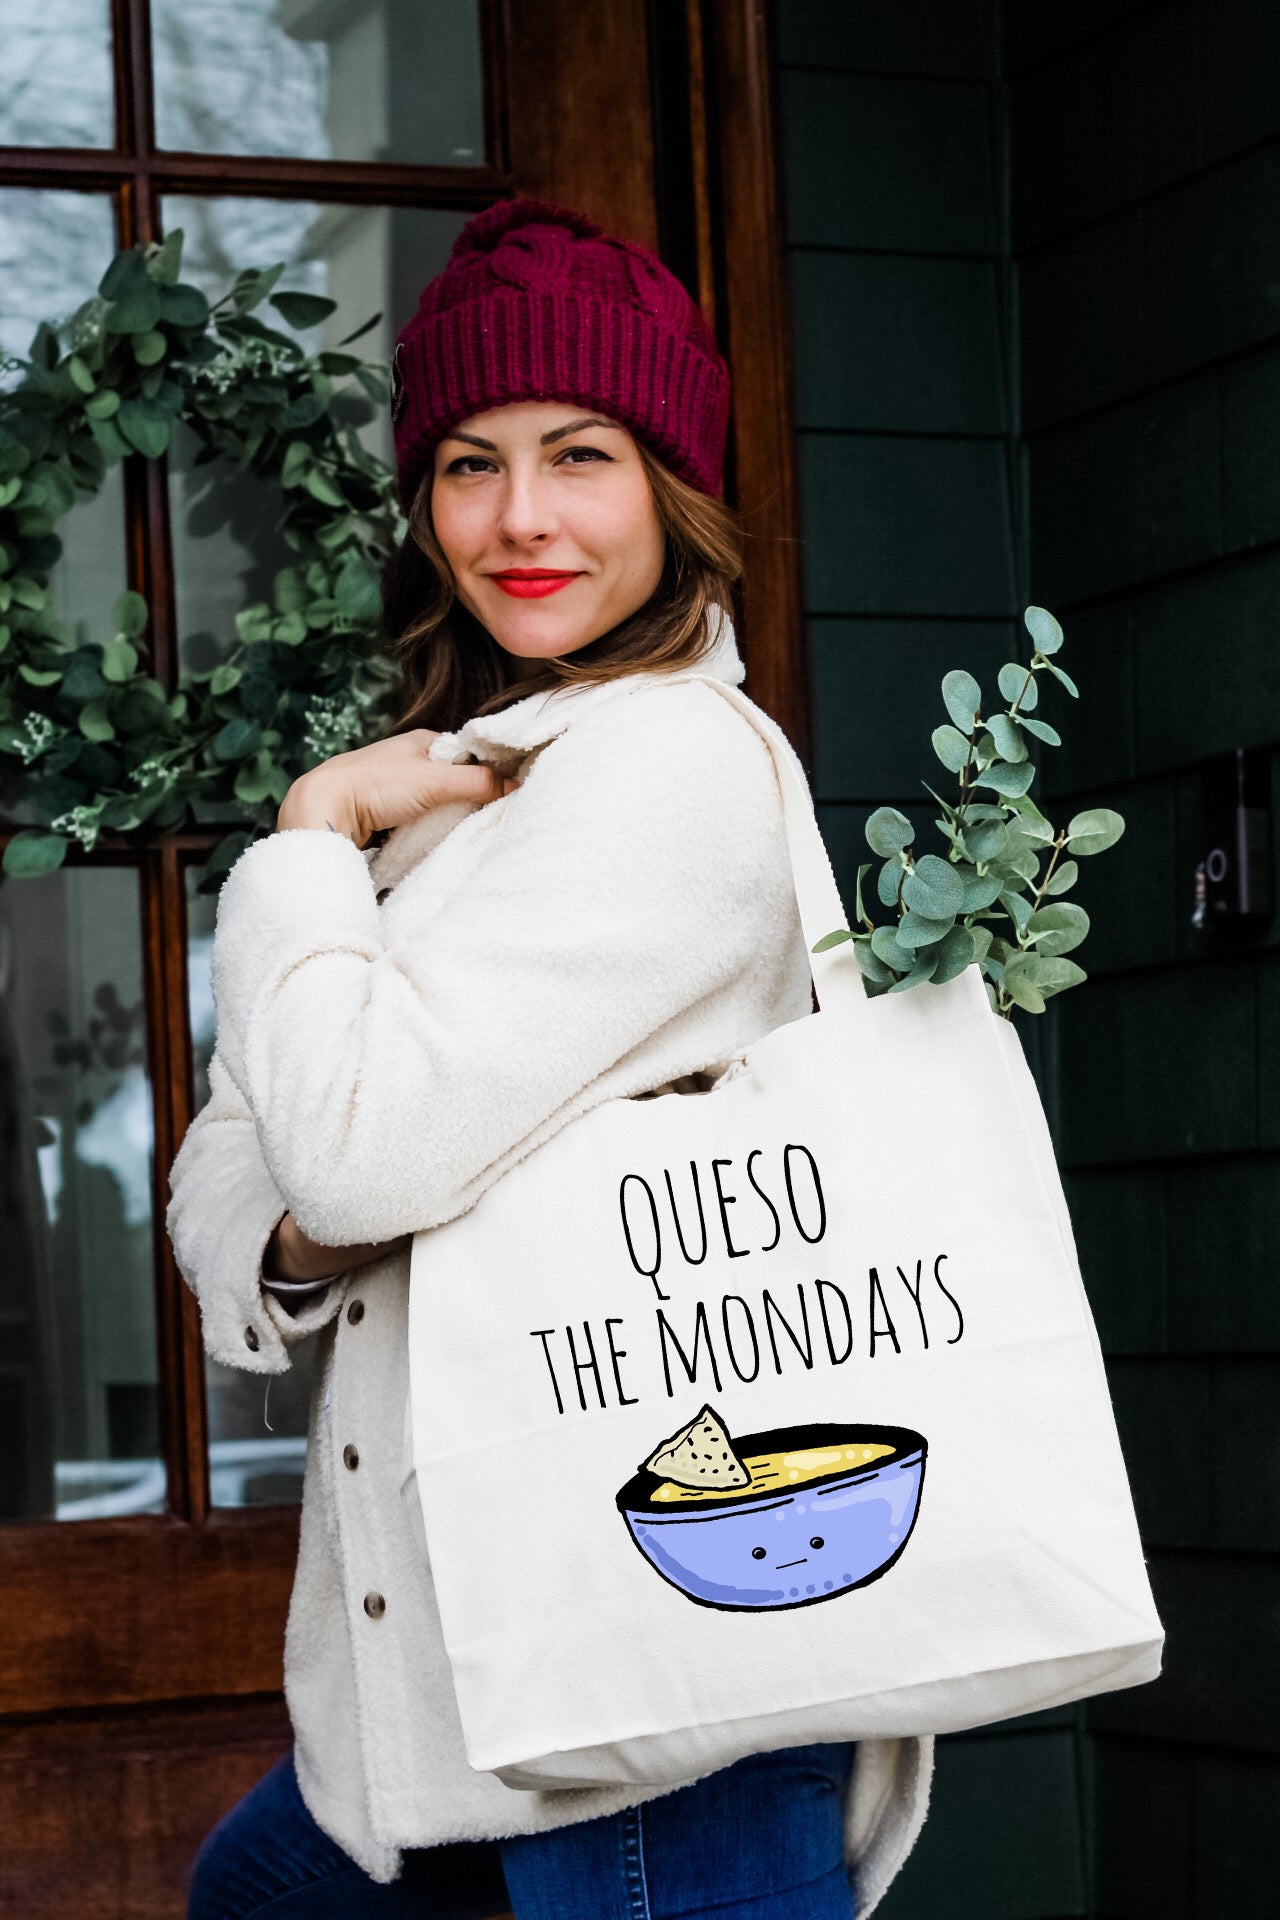 a woman carrying a bag that says queso the mondays